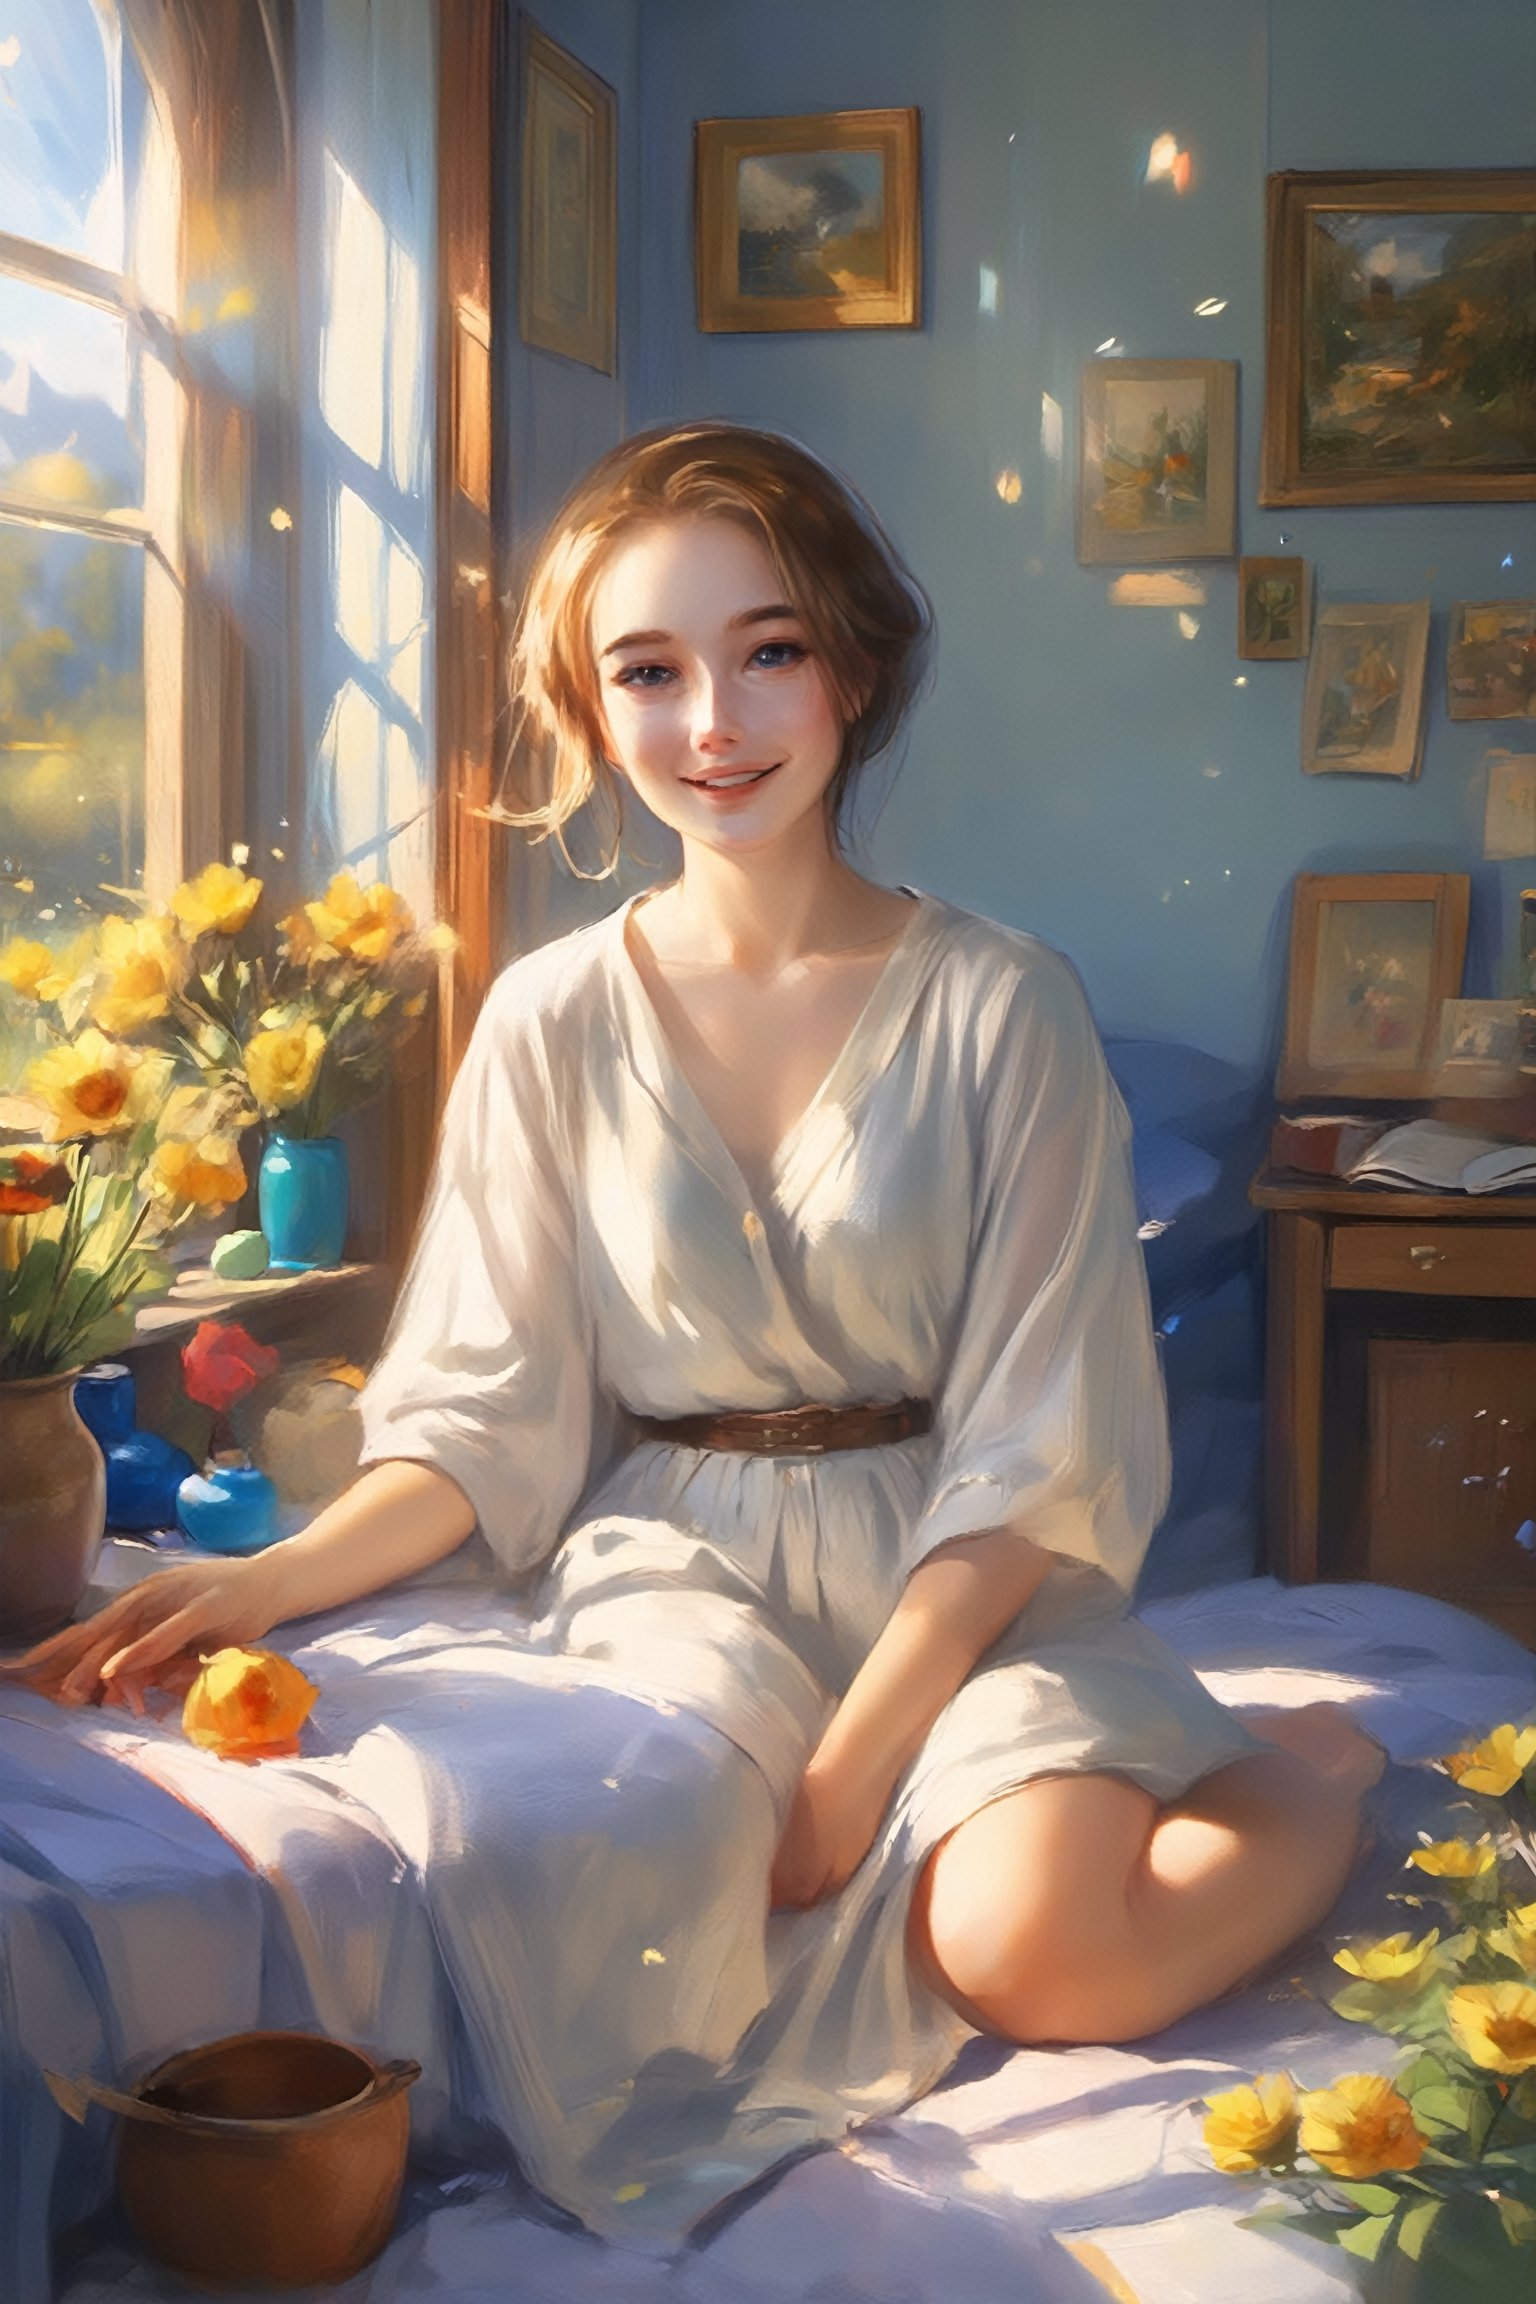 (1girl), beautiful girl smiles, beautiful eyes, high detail, clear face, light falls on her face, cozy room, wildflowers, sunny day, voluminous lighting, soft morning light, sunlight glinting on her skin, Russian beauty (in color, color illustration), ((full body), low-key, sharp focus on subject, intricate environment scenery:1.1), (masterpiece, detailed, highres:1.4), (perfect feminine anatomy, perfect proportions, Perfect Hands:1.125), Sweeping cinematic lens flares, ultra crisp details, (f_stop 2.8), (focal_length 85mm f/2.8), K-Eyes, Perfect Hands, Wonder of Beauty, K-Eyes,Long Legs and Hot Body,K-Eyes,oil painting,<lora:EMS-248183-EMS:1.000000>,<lora:EMS-305041-EMS:1.000000>,<lora:EMS-302885-EMS:0.300000>